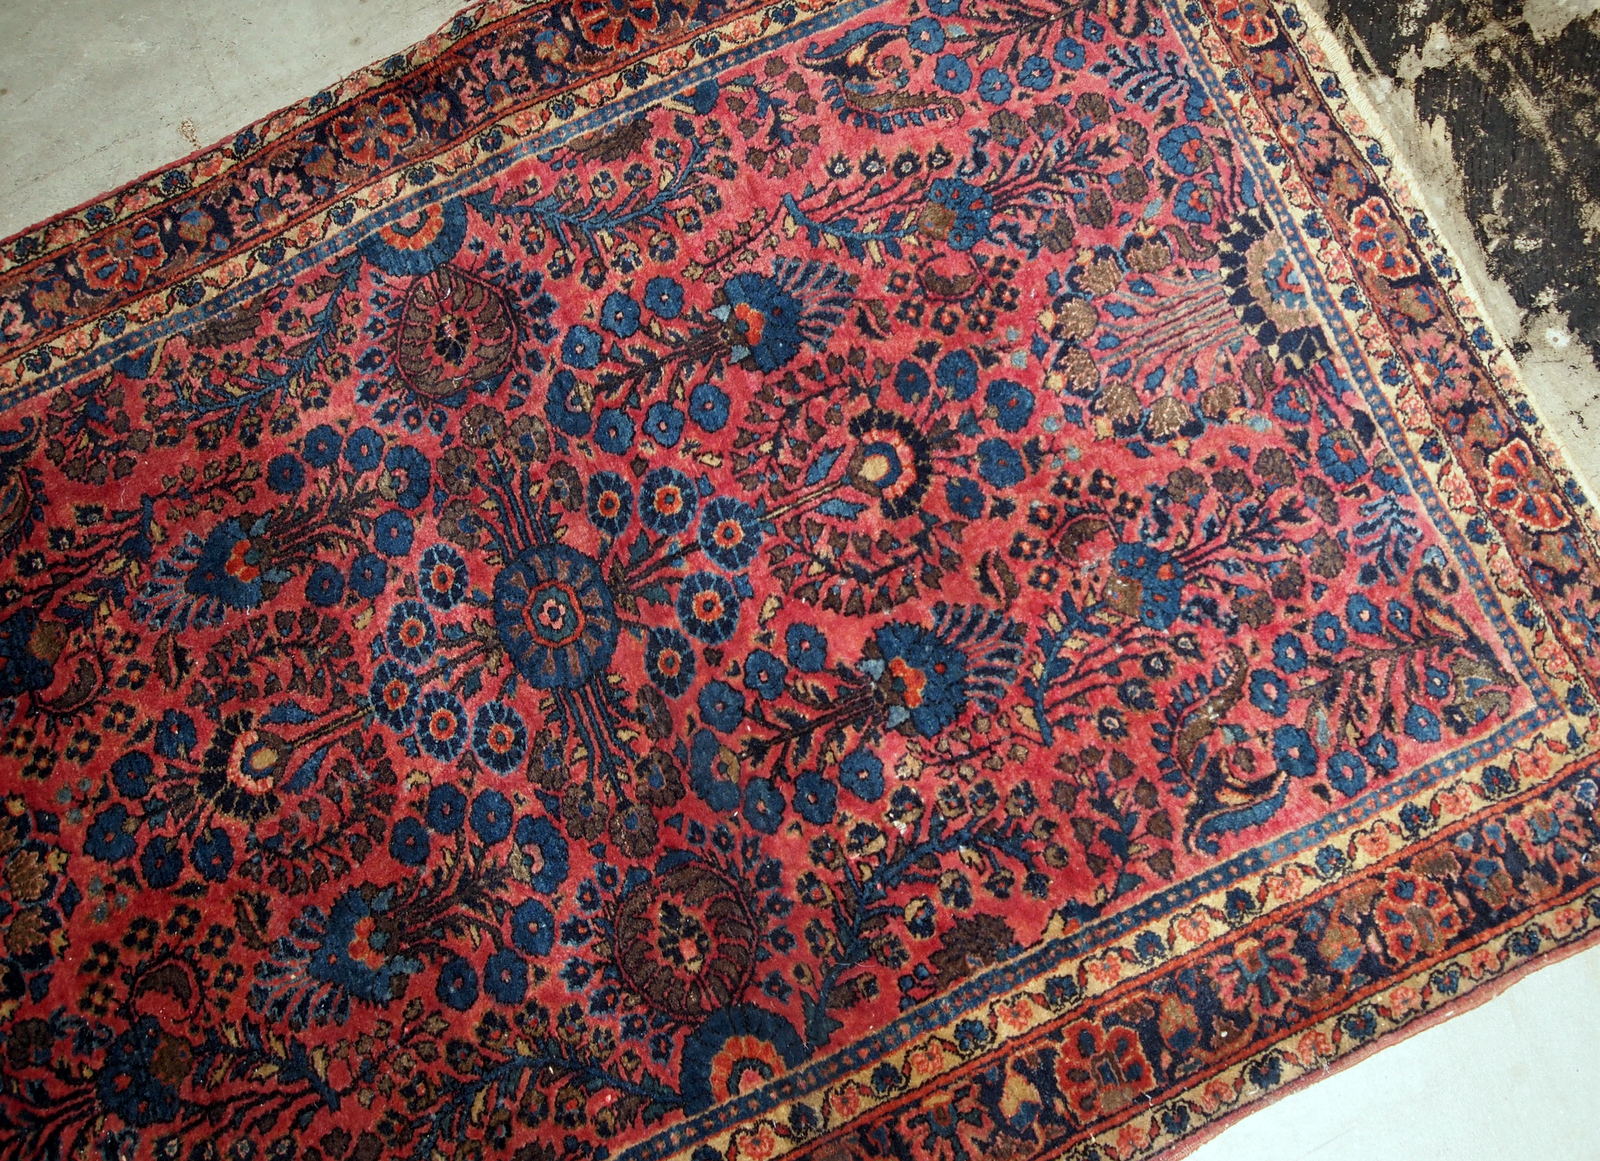 Handmade antique Sarouk rug in bright red and blue shades. The rug is in original good condition from the beginning of 20th century.